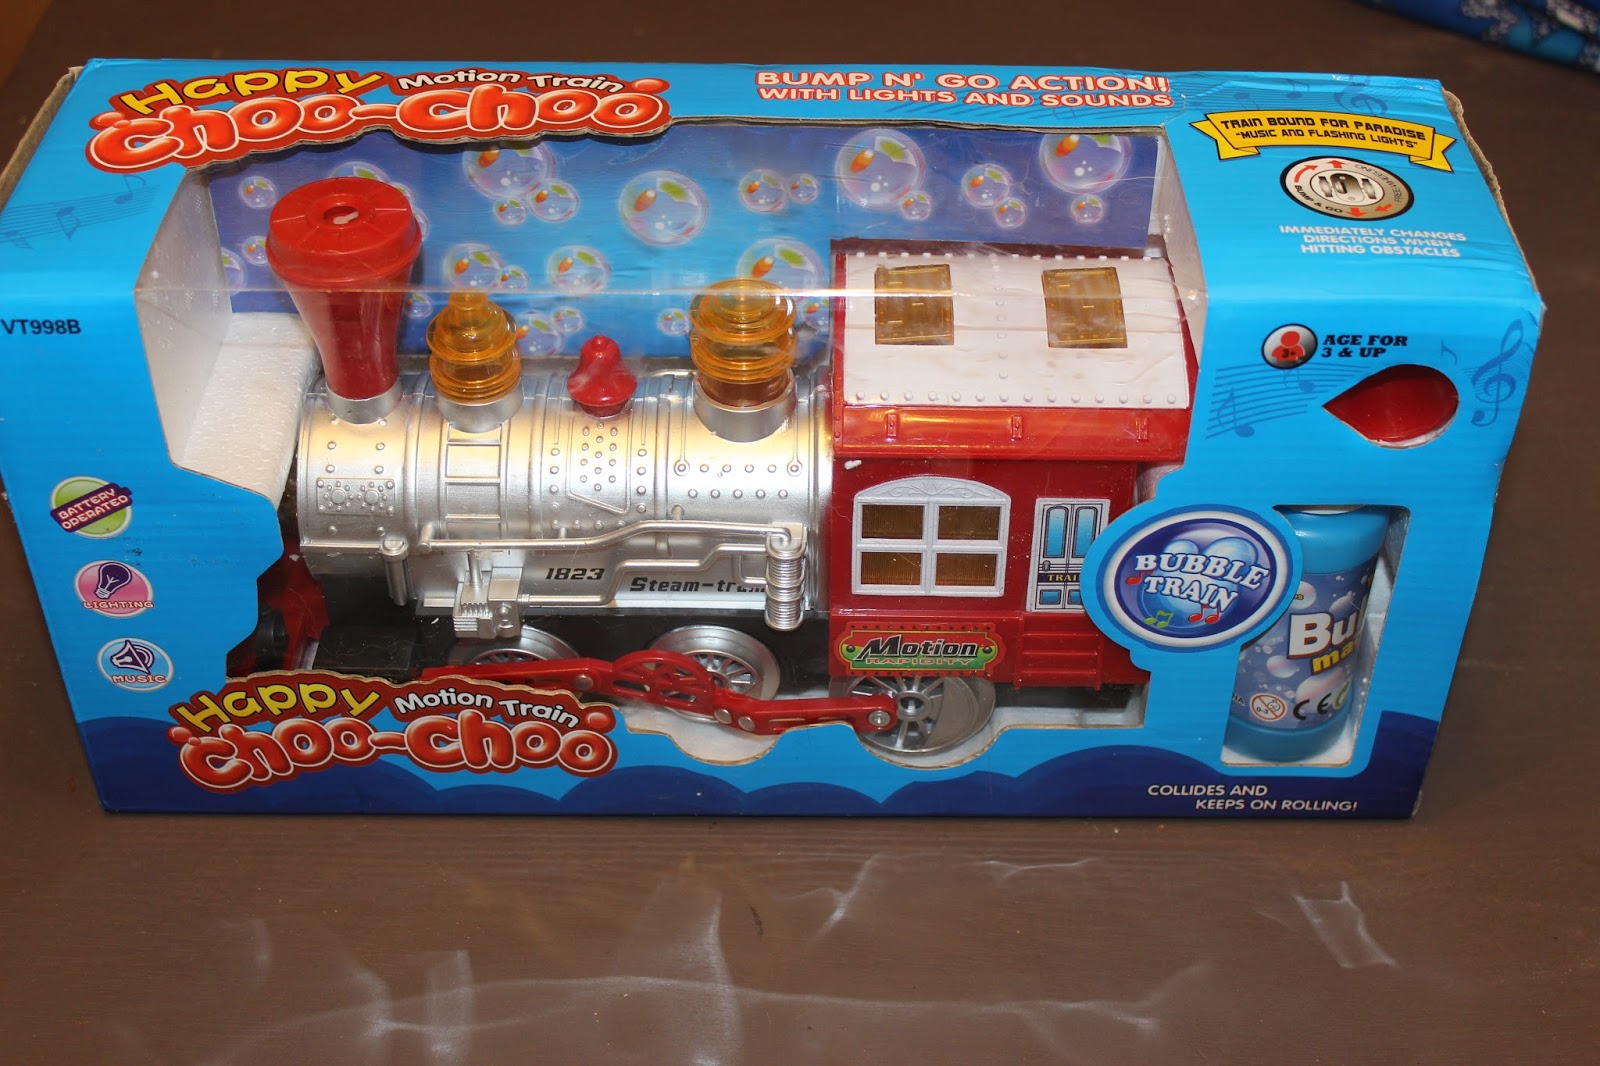 World King Toys Sharky Steam Bubble Blowing Train Engine Car Locomotive Bump and Go Battery Operated Toy Train with Lights and Sounds 